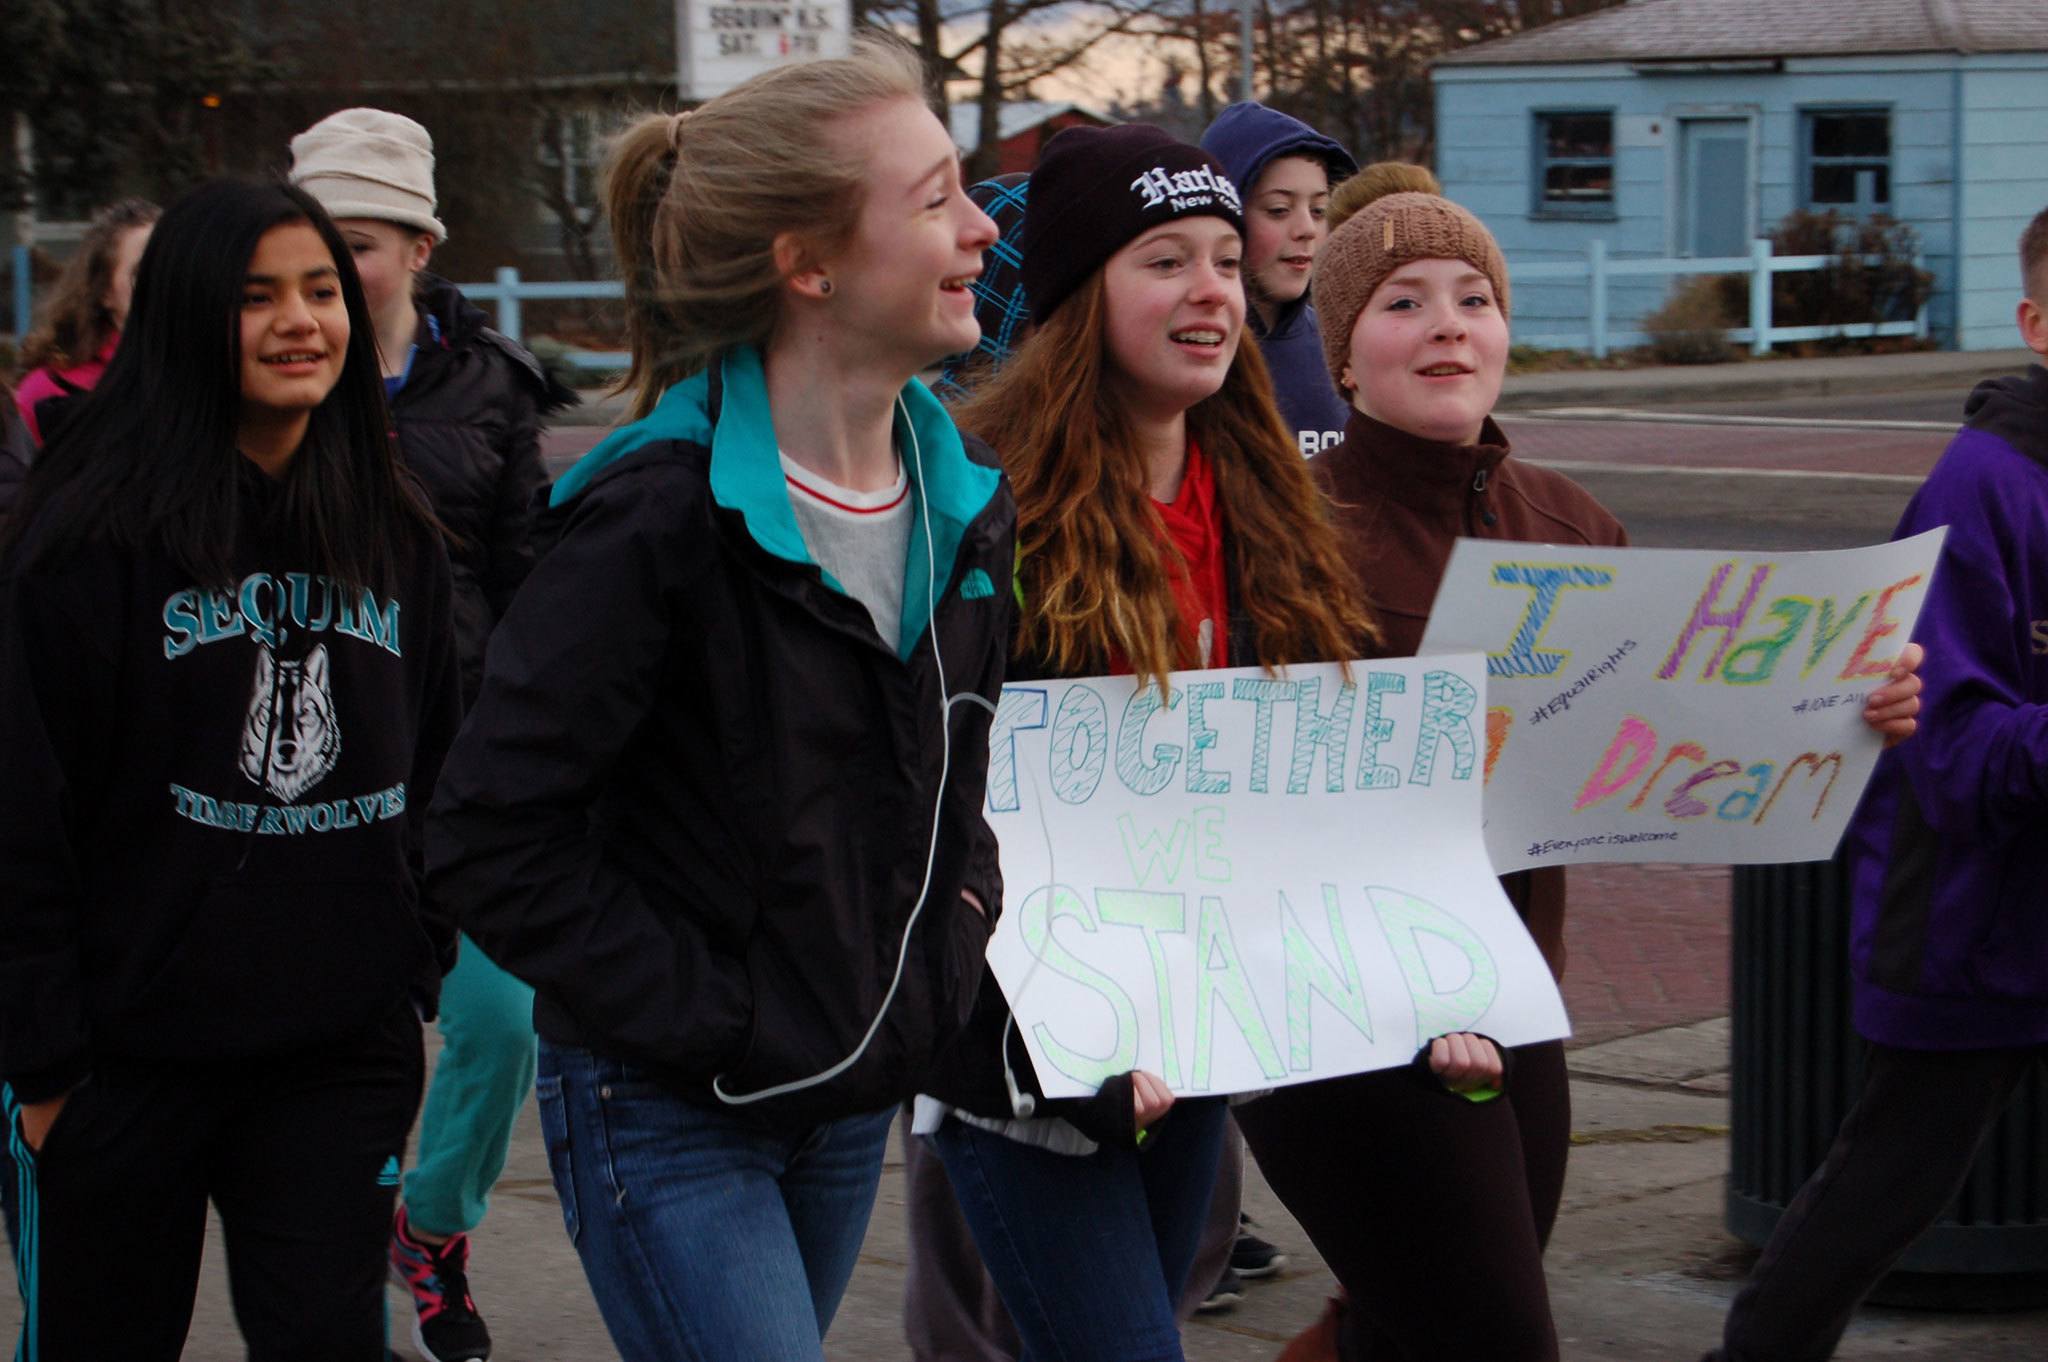 Eighth-graders Olivia Preston, right, and Mary Mcaller, center, hold signs alongside Maya Reiter during the Sequim Middle School Martin Luther King Day Jr. walk.